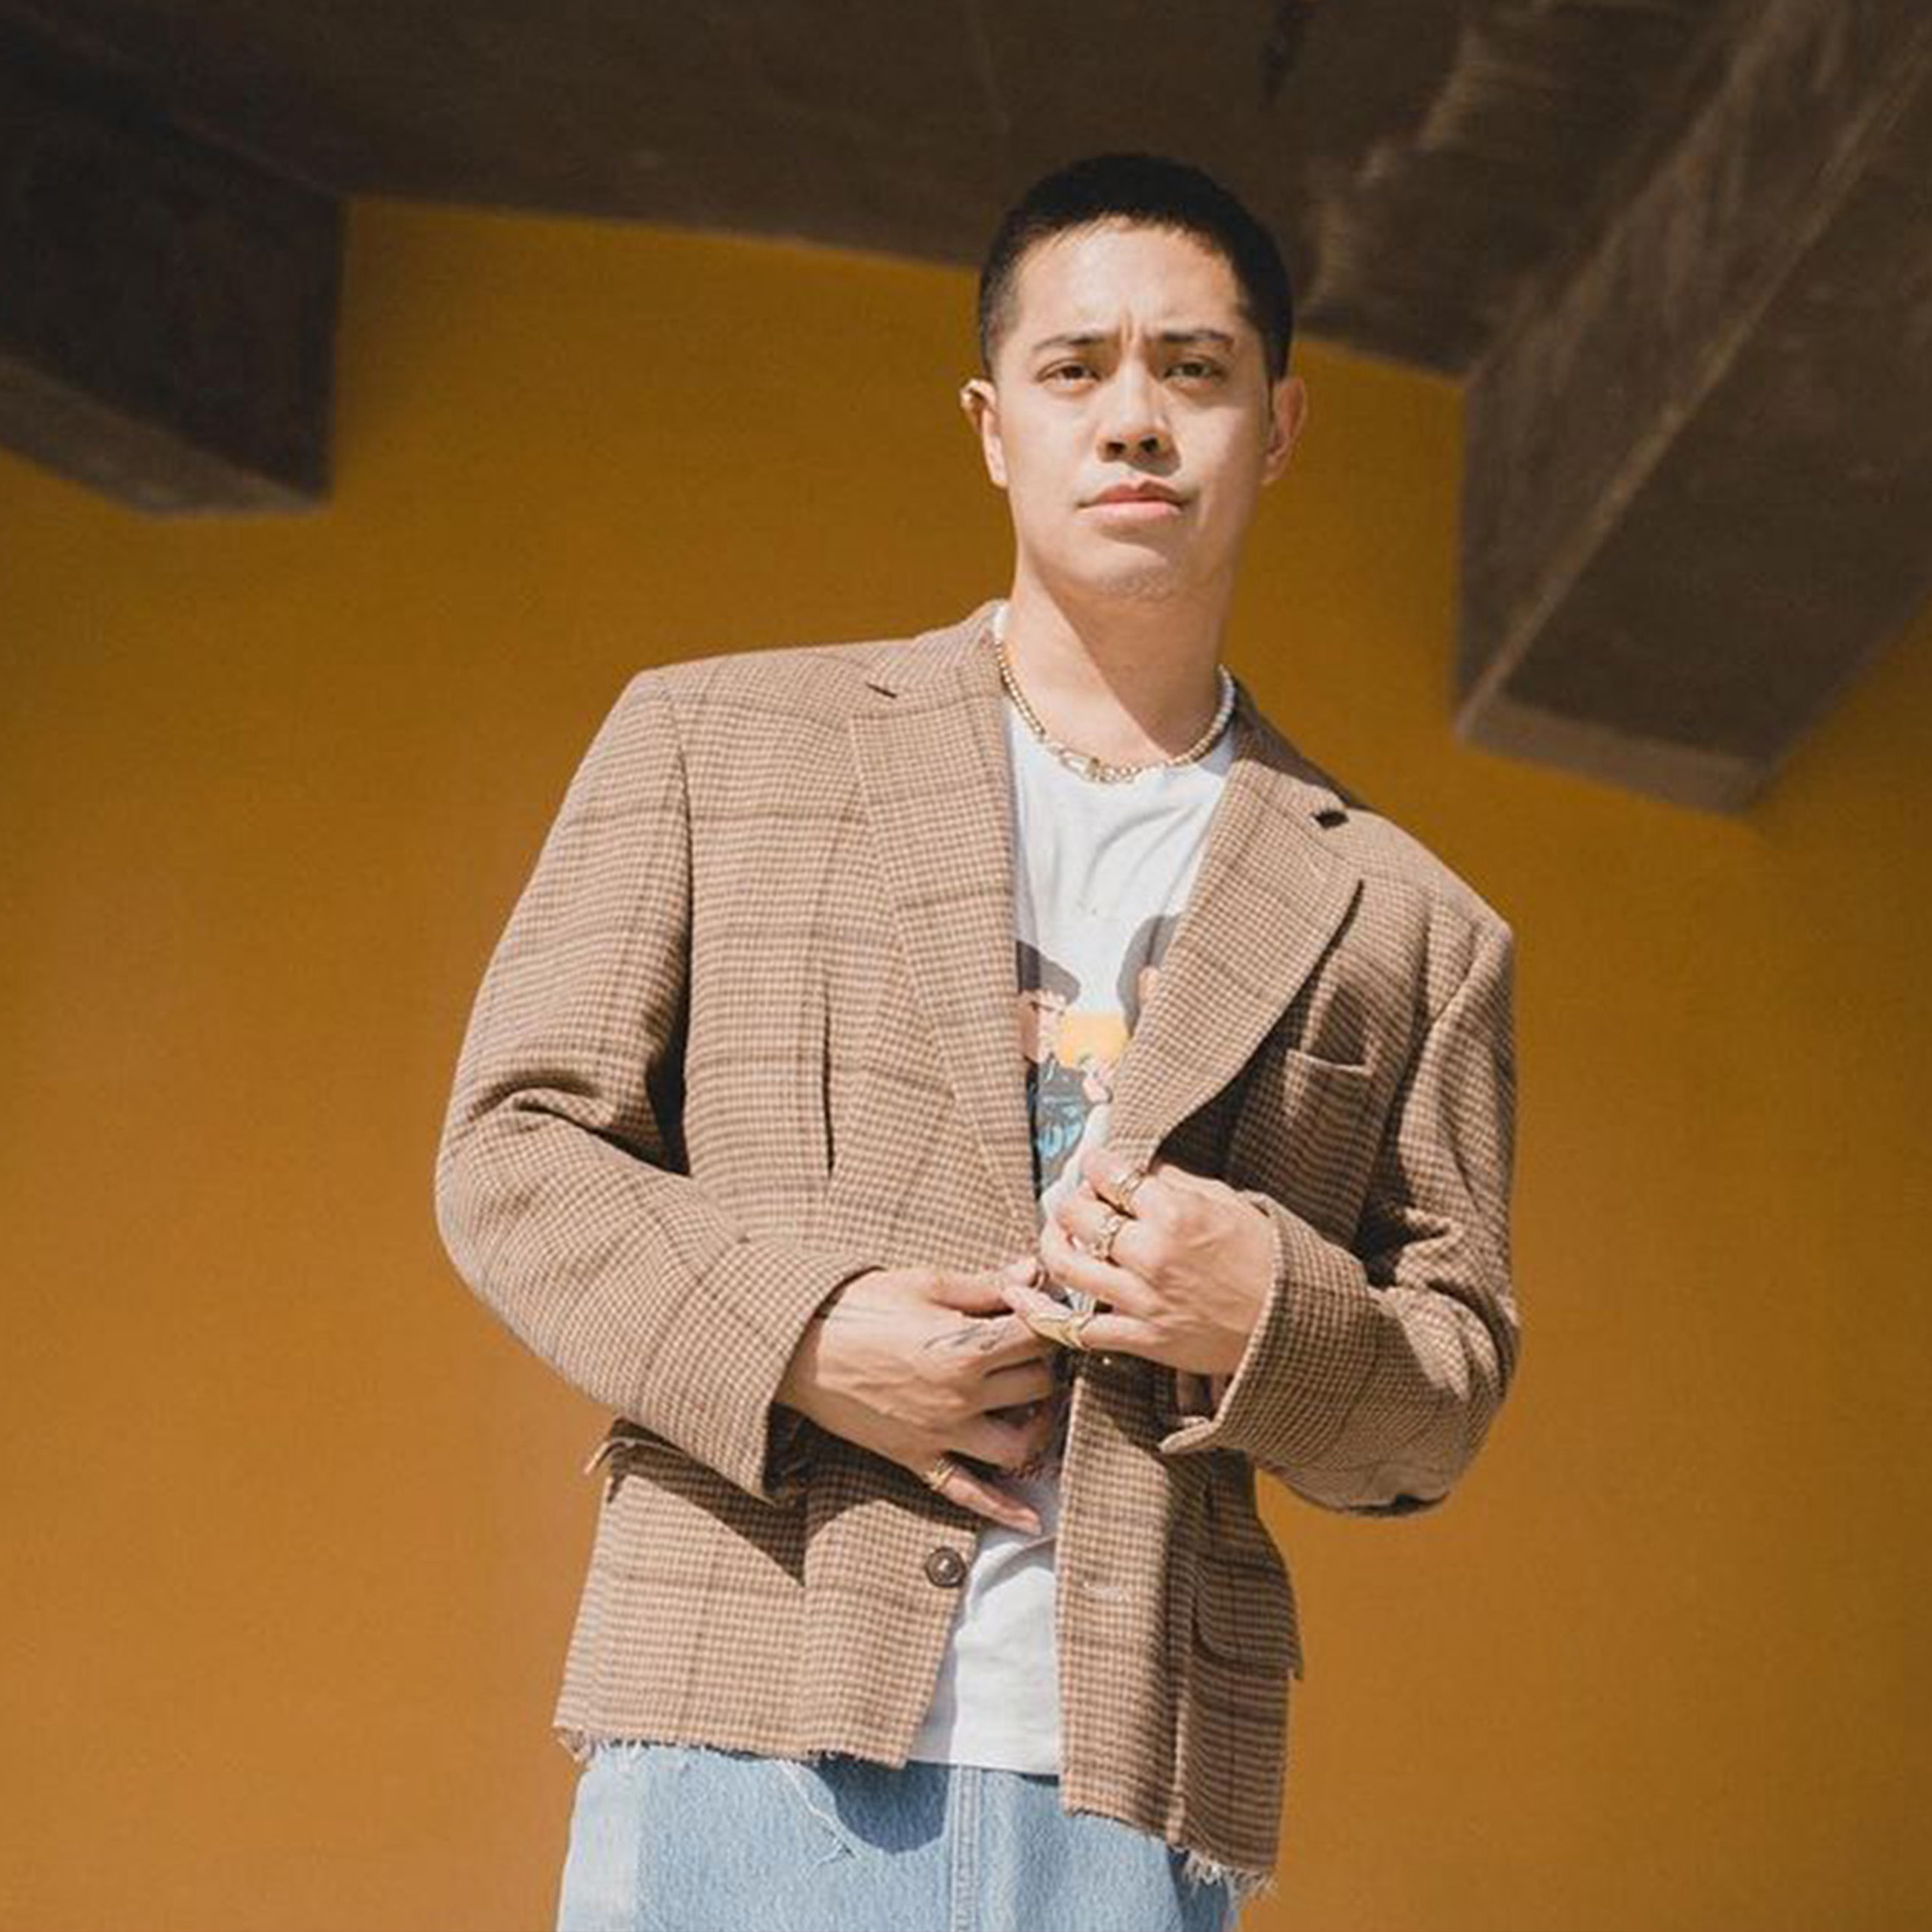 Meet Brian Puspos, the Filipino Choreographer Who Grooved With Jung Kook in New Song